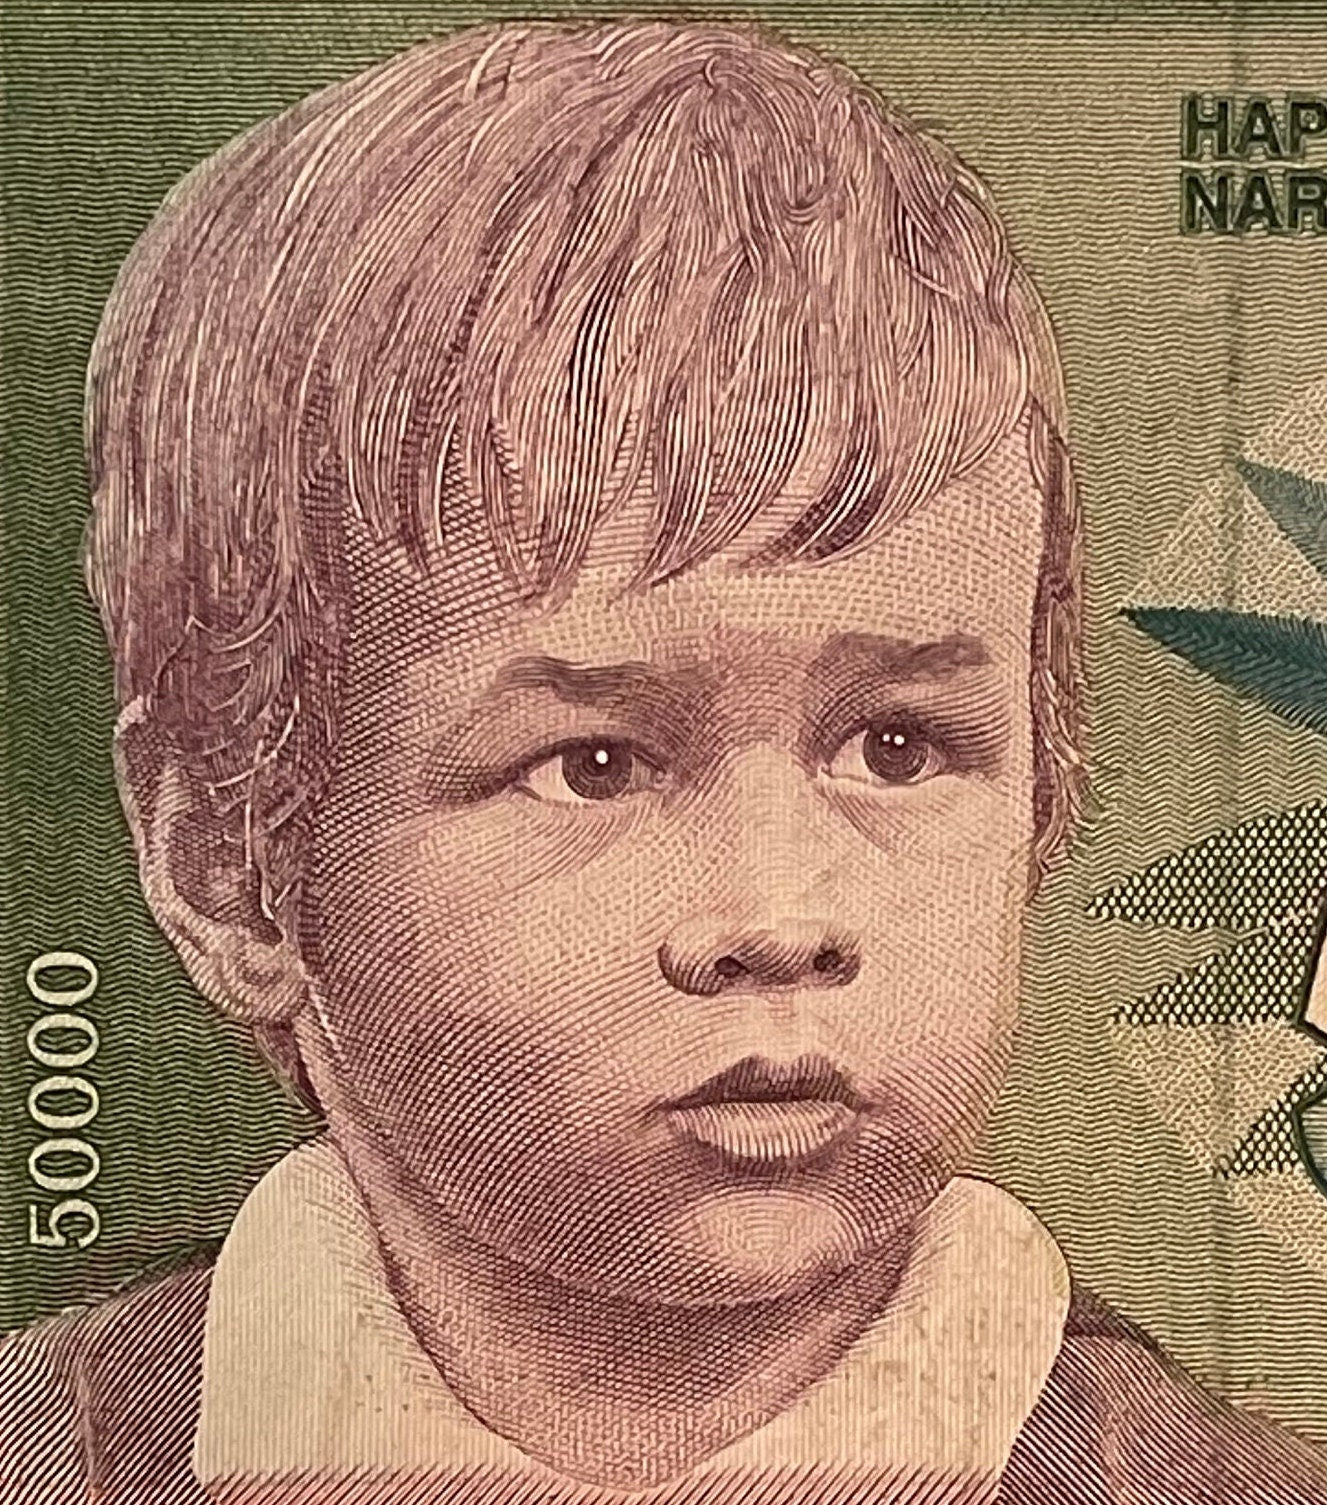 Roses & Boy 50,000 Dinara Yugoslavia Authentic Banknote Money for Jewelry and Craft Making (1992) (CONDITION: VERY FINE)